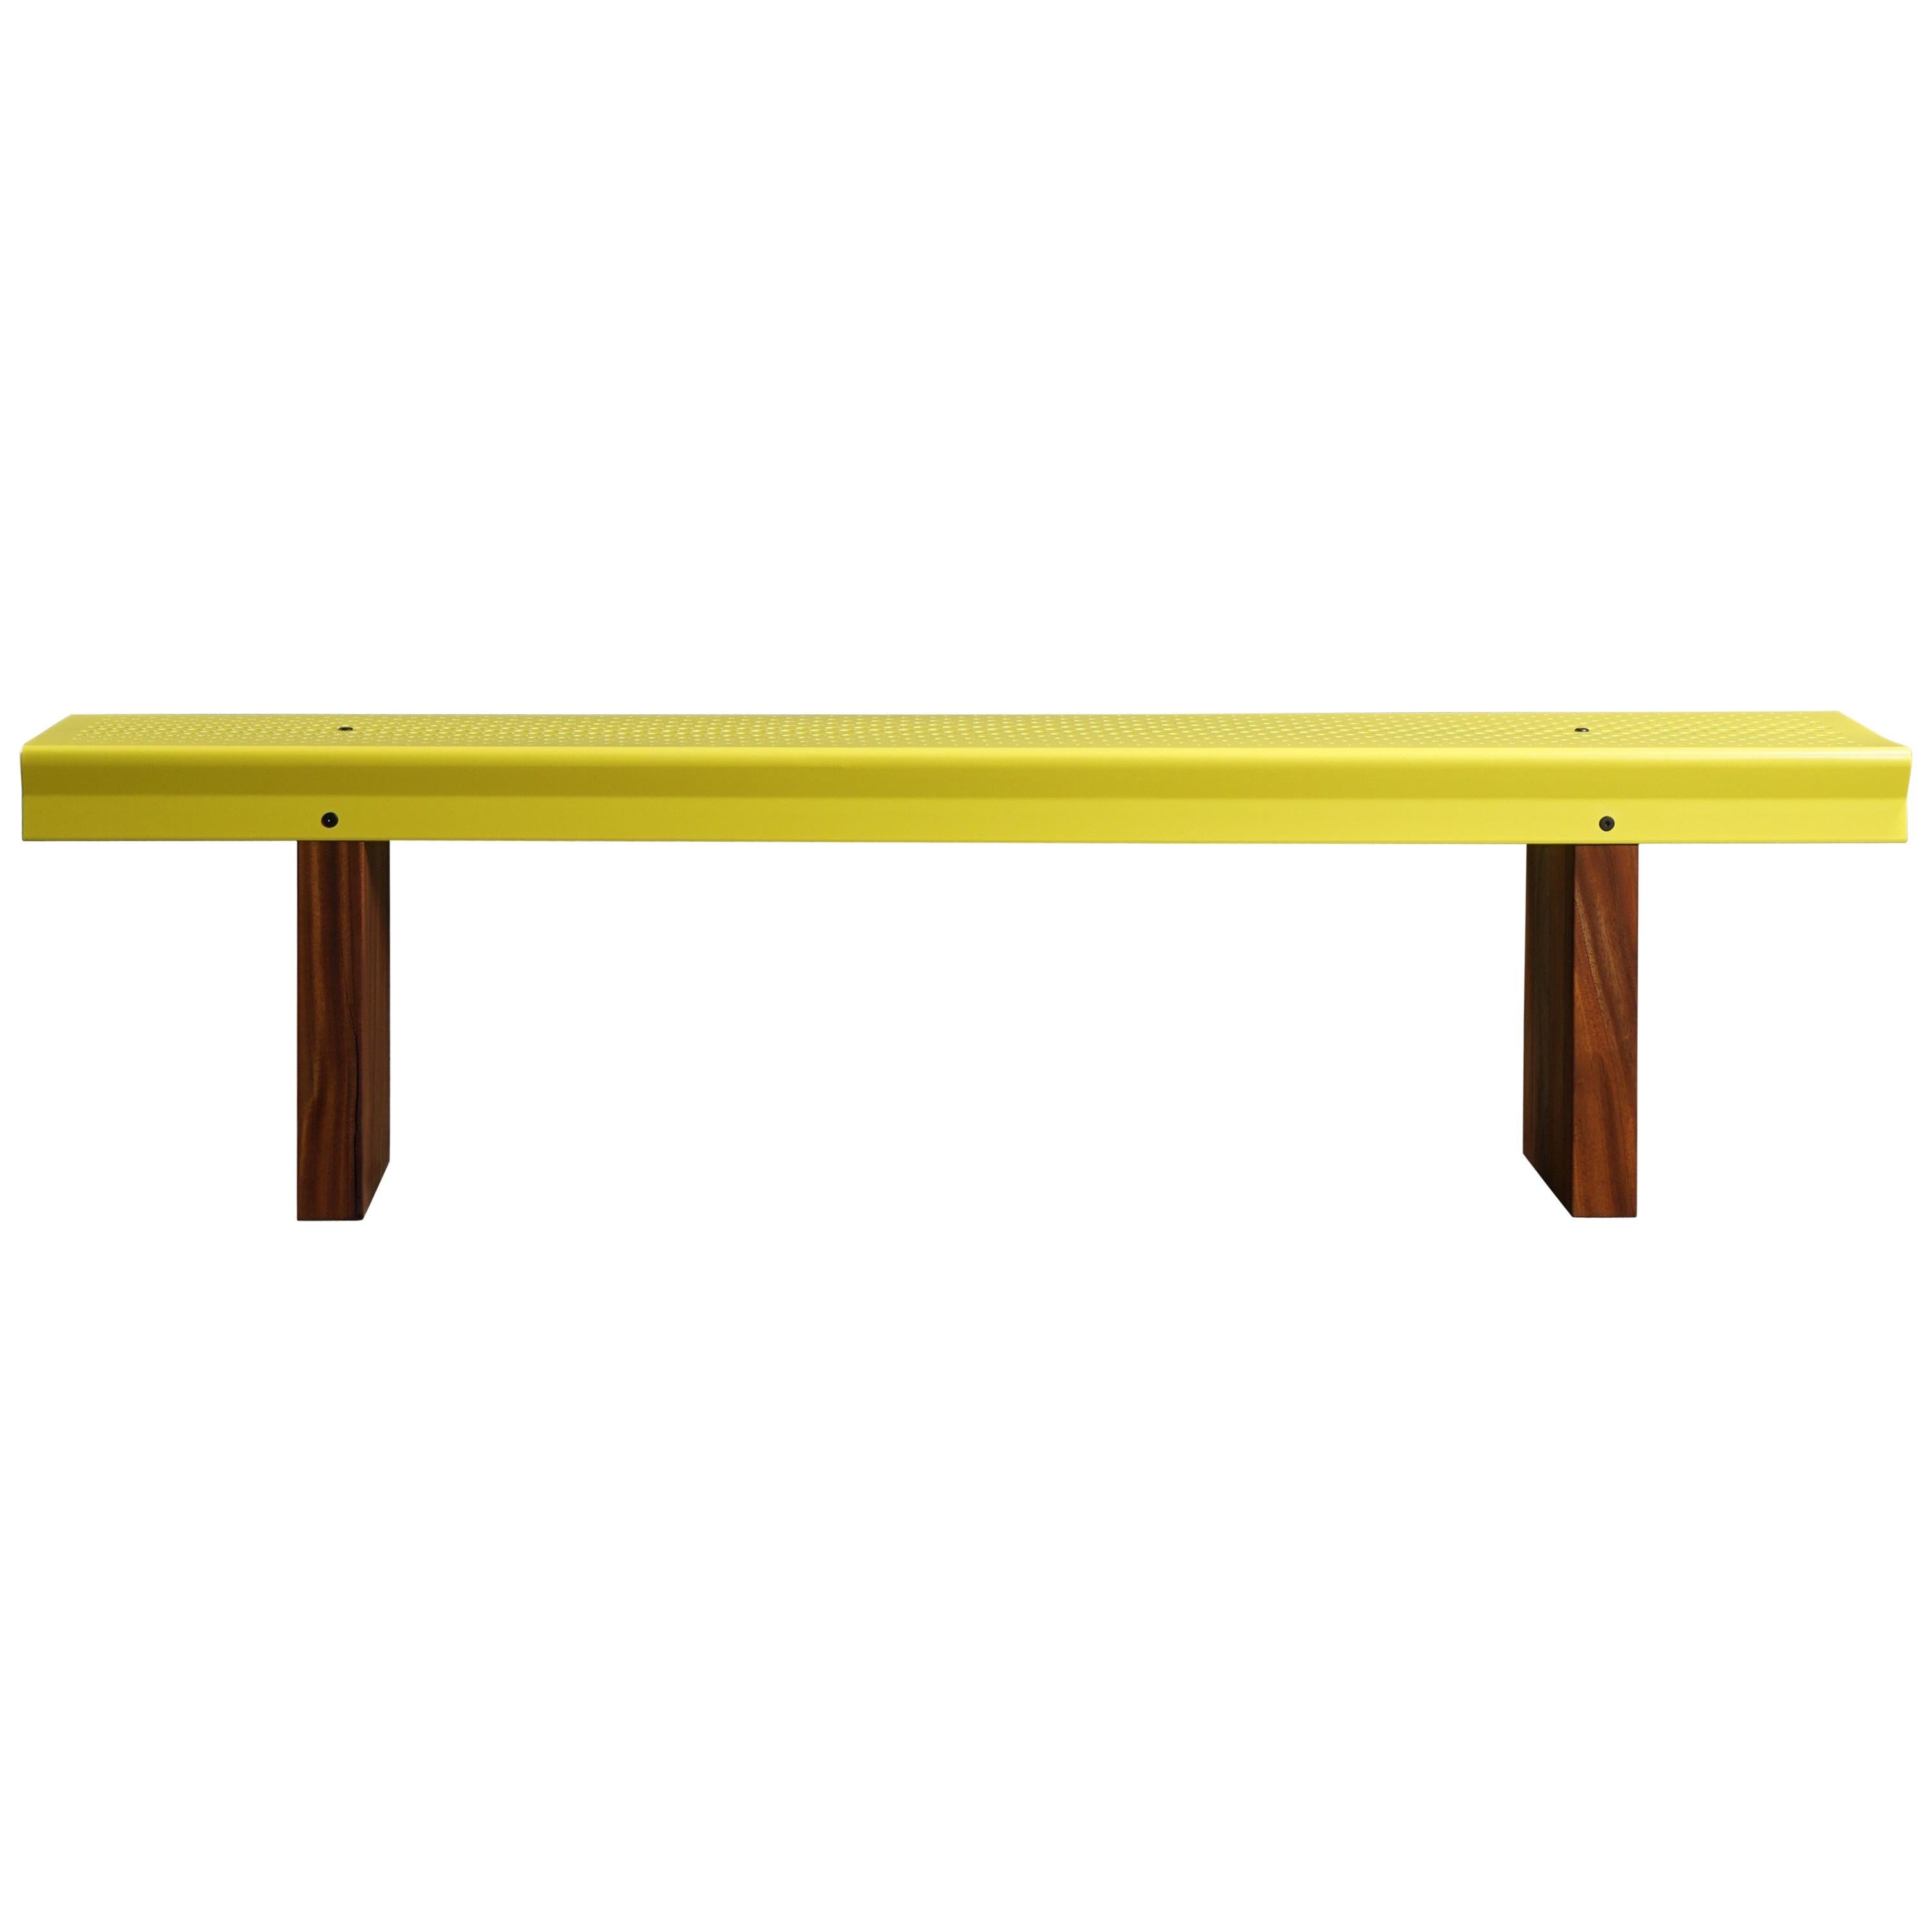 Bench, Yellow Coated Metal, Mahogany Legs, Designed and Made by Max Frommeld For Sale